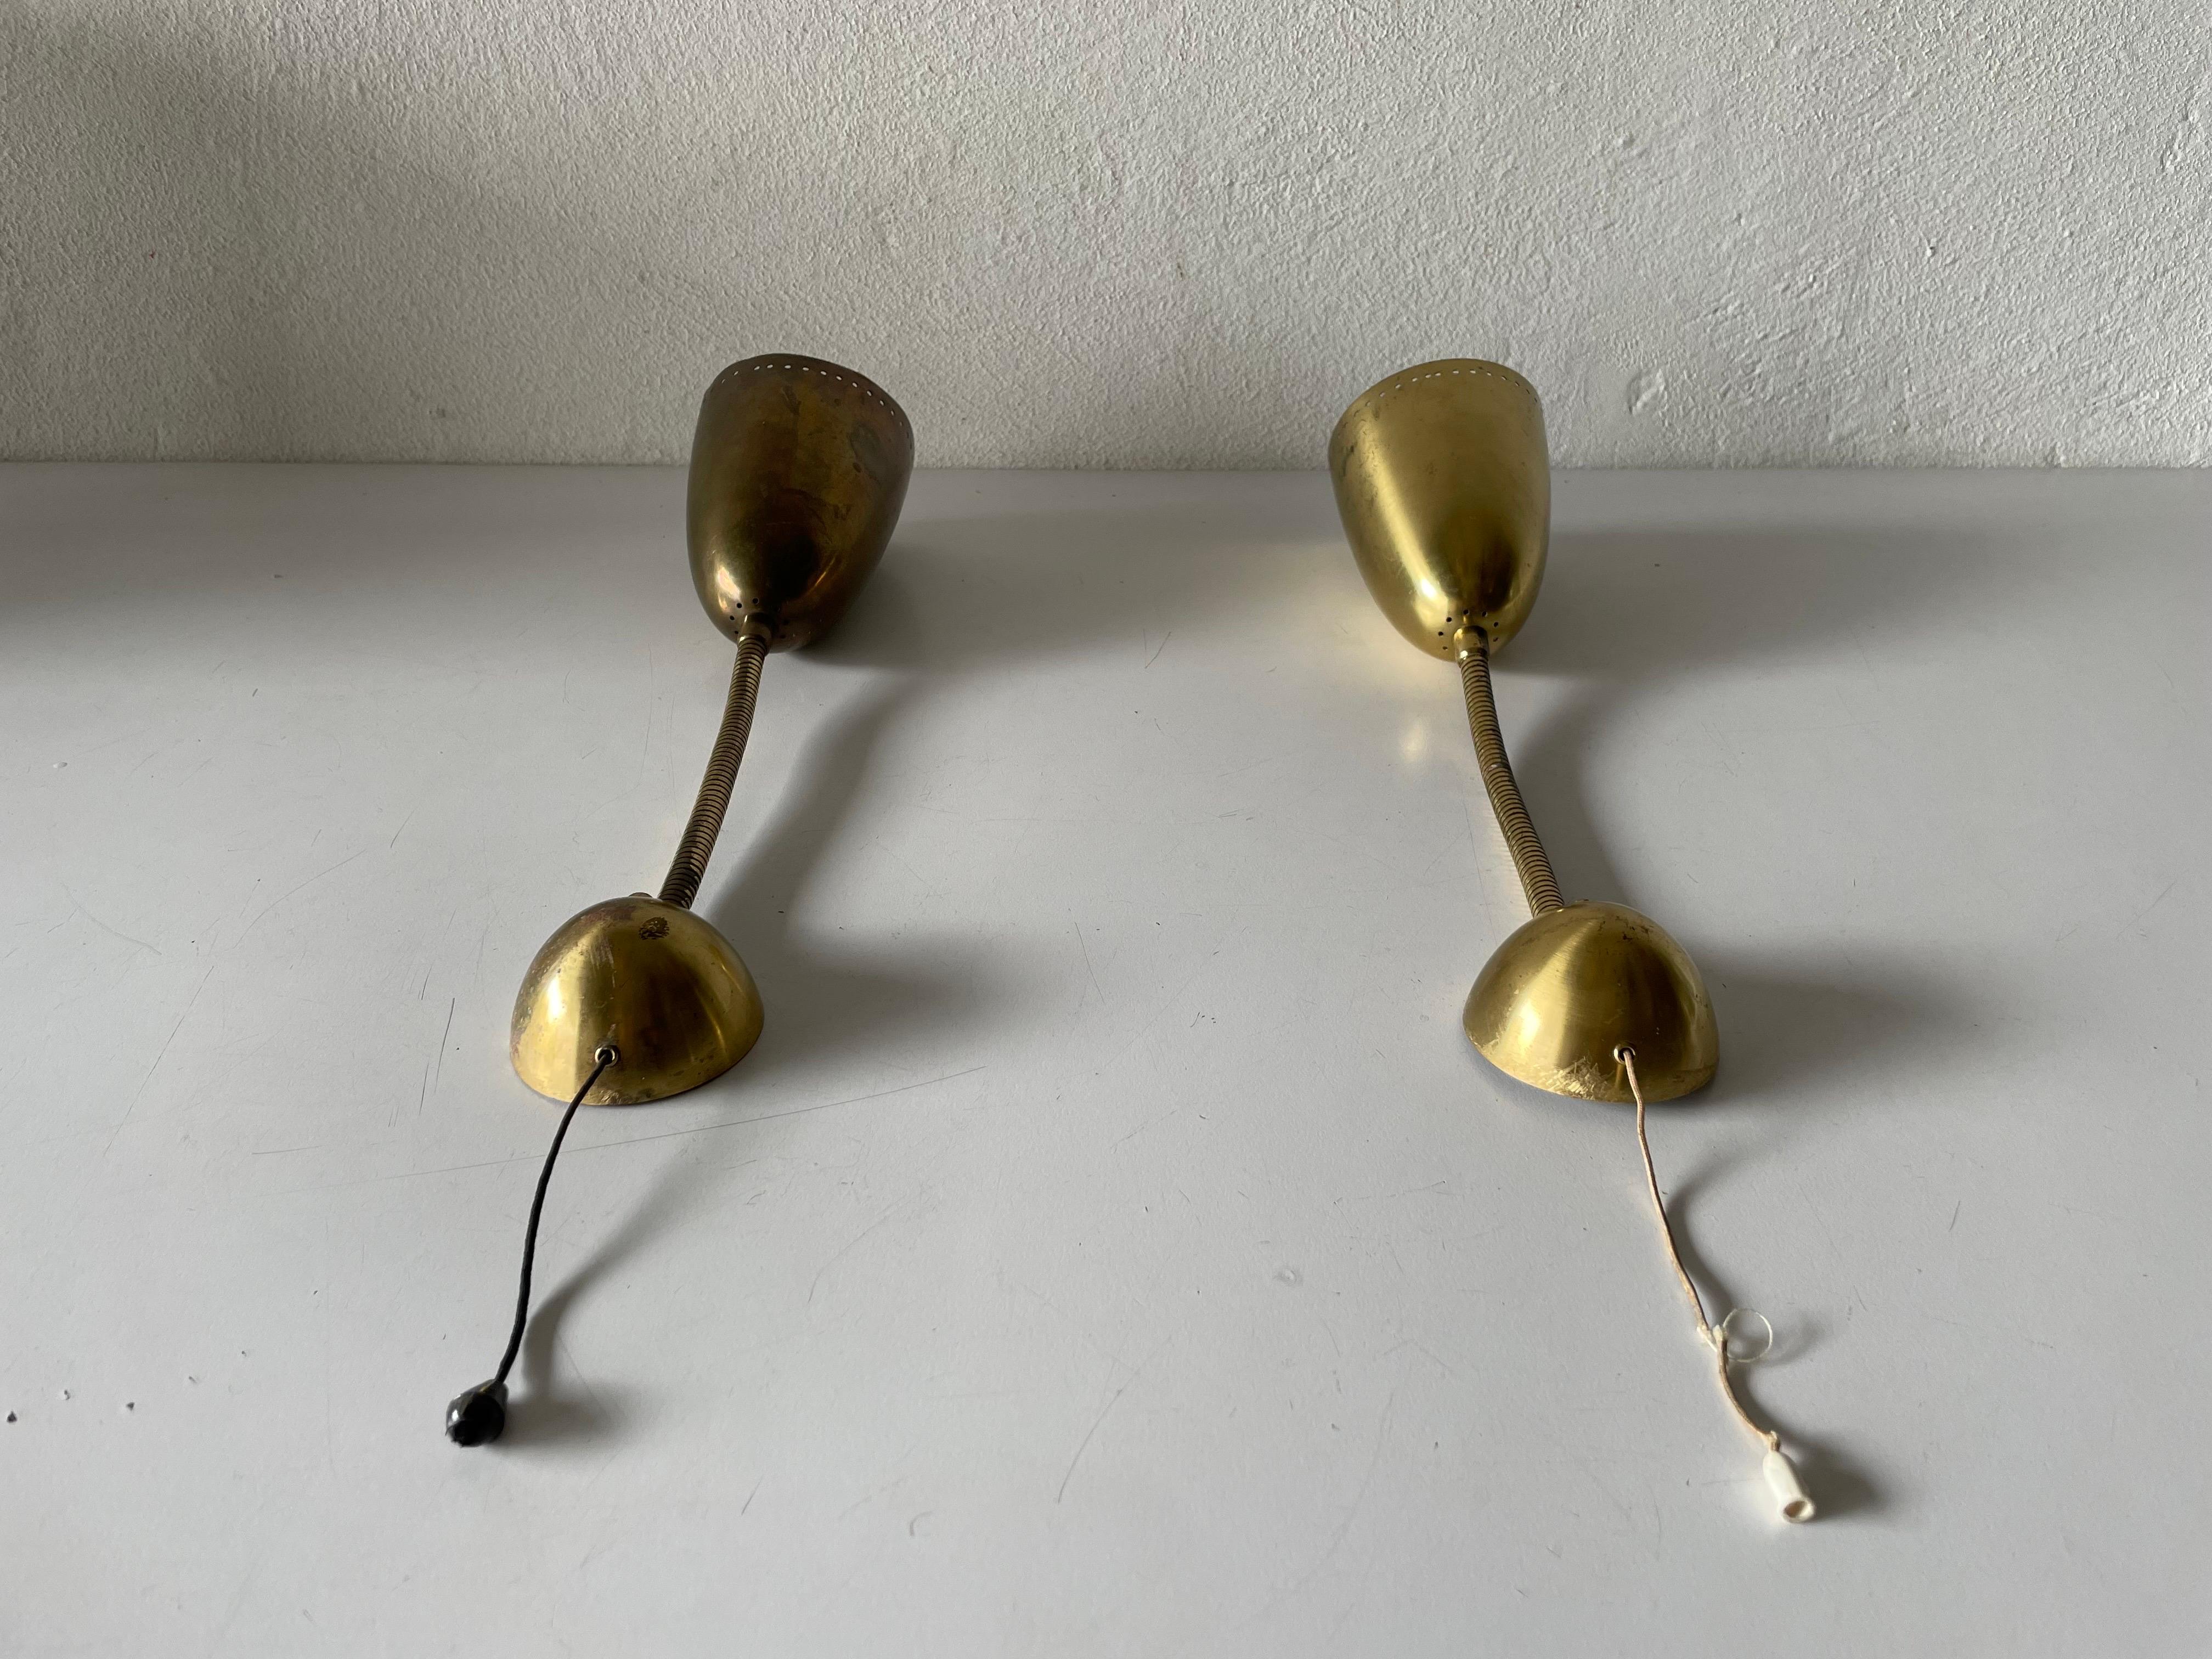 Mid-Century Modern gold metal pair of sconces, 1950s, Germany.

Very elegant and Minimalist wall lamps.
Lamp is in very good condition.

These lamps works with E27 standard light bulbs. 
Wired and suitable to use in all countries. (110-220